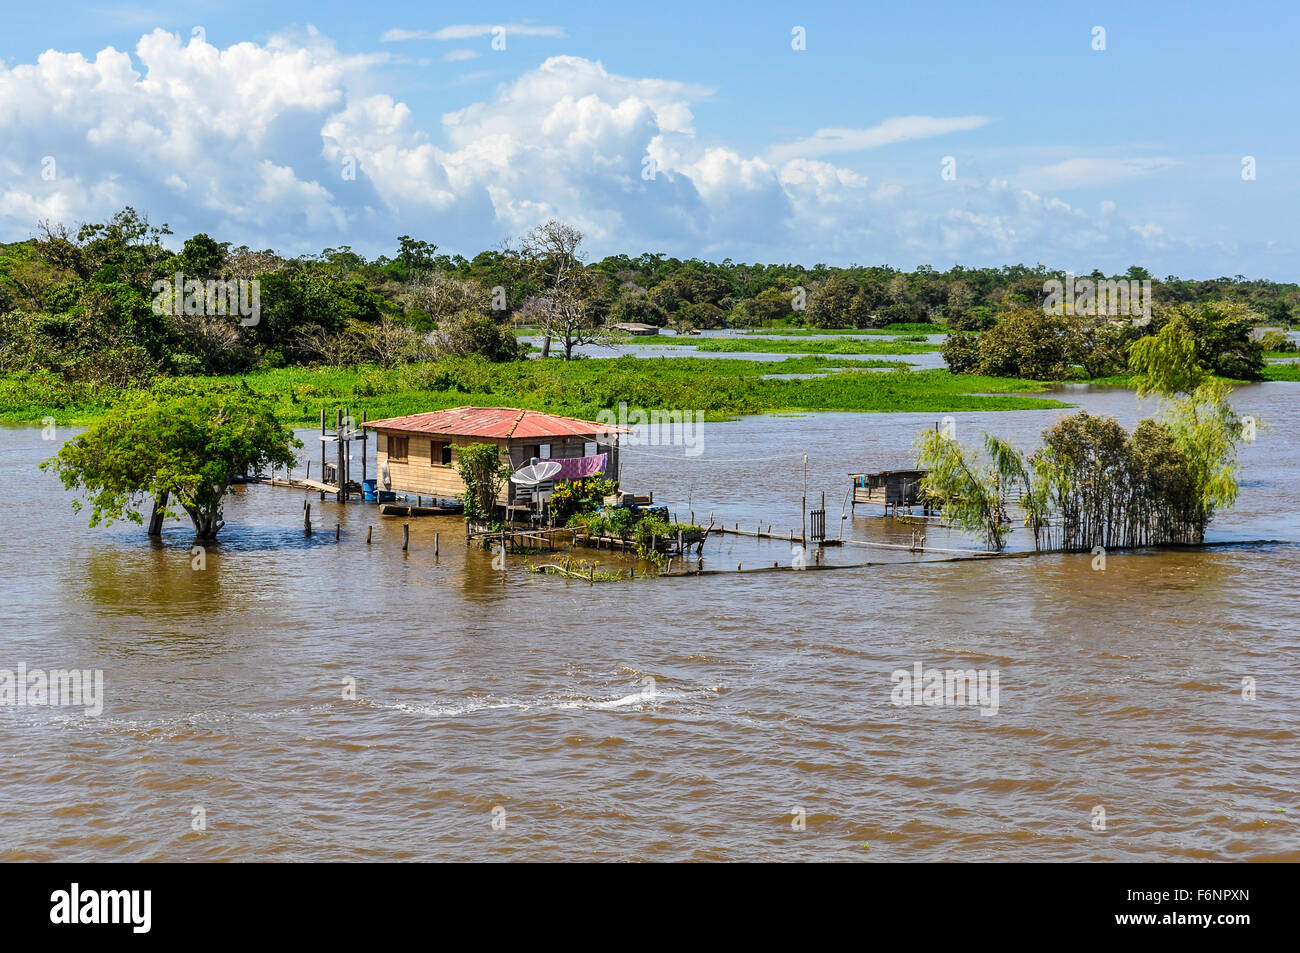 Rainy season as seen from the boat on the Amazon River in Brazil. Stock Photo